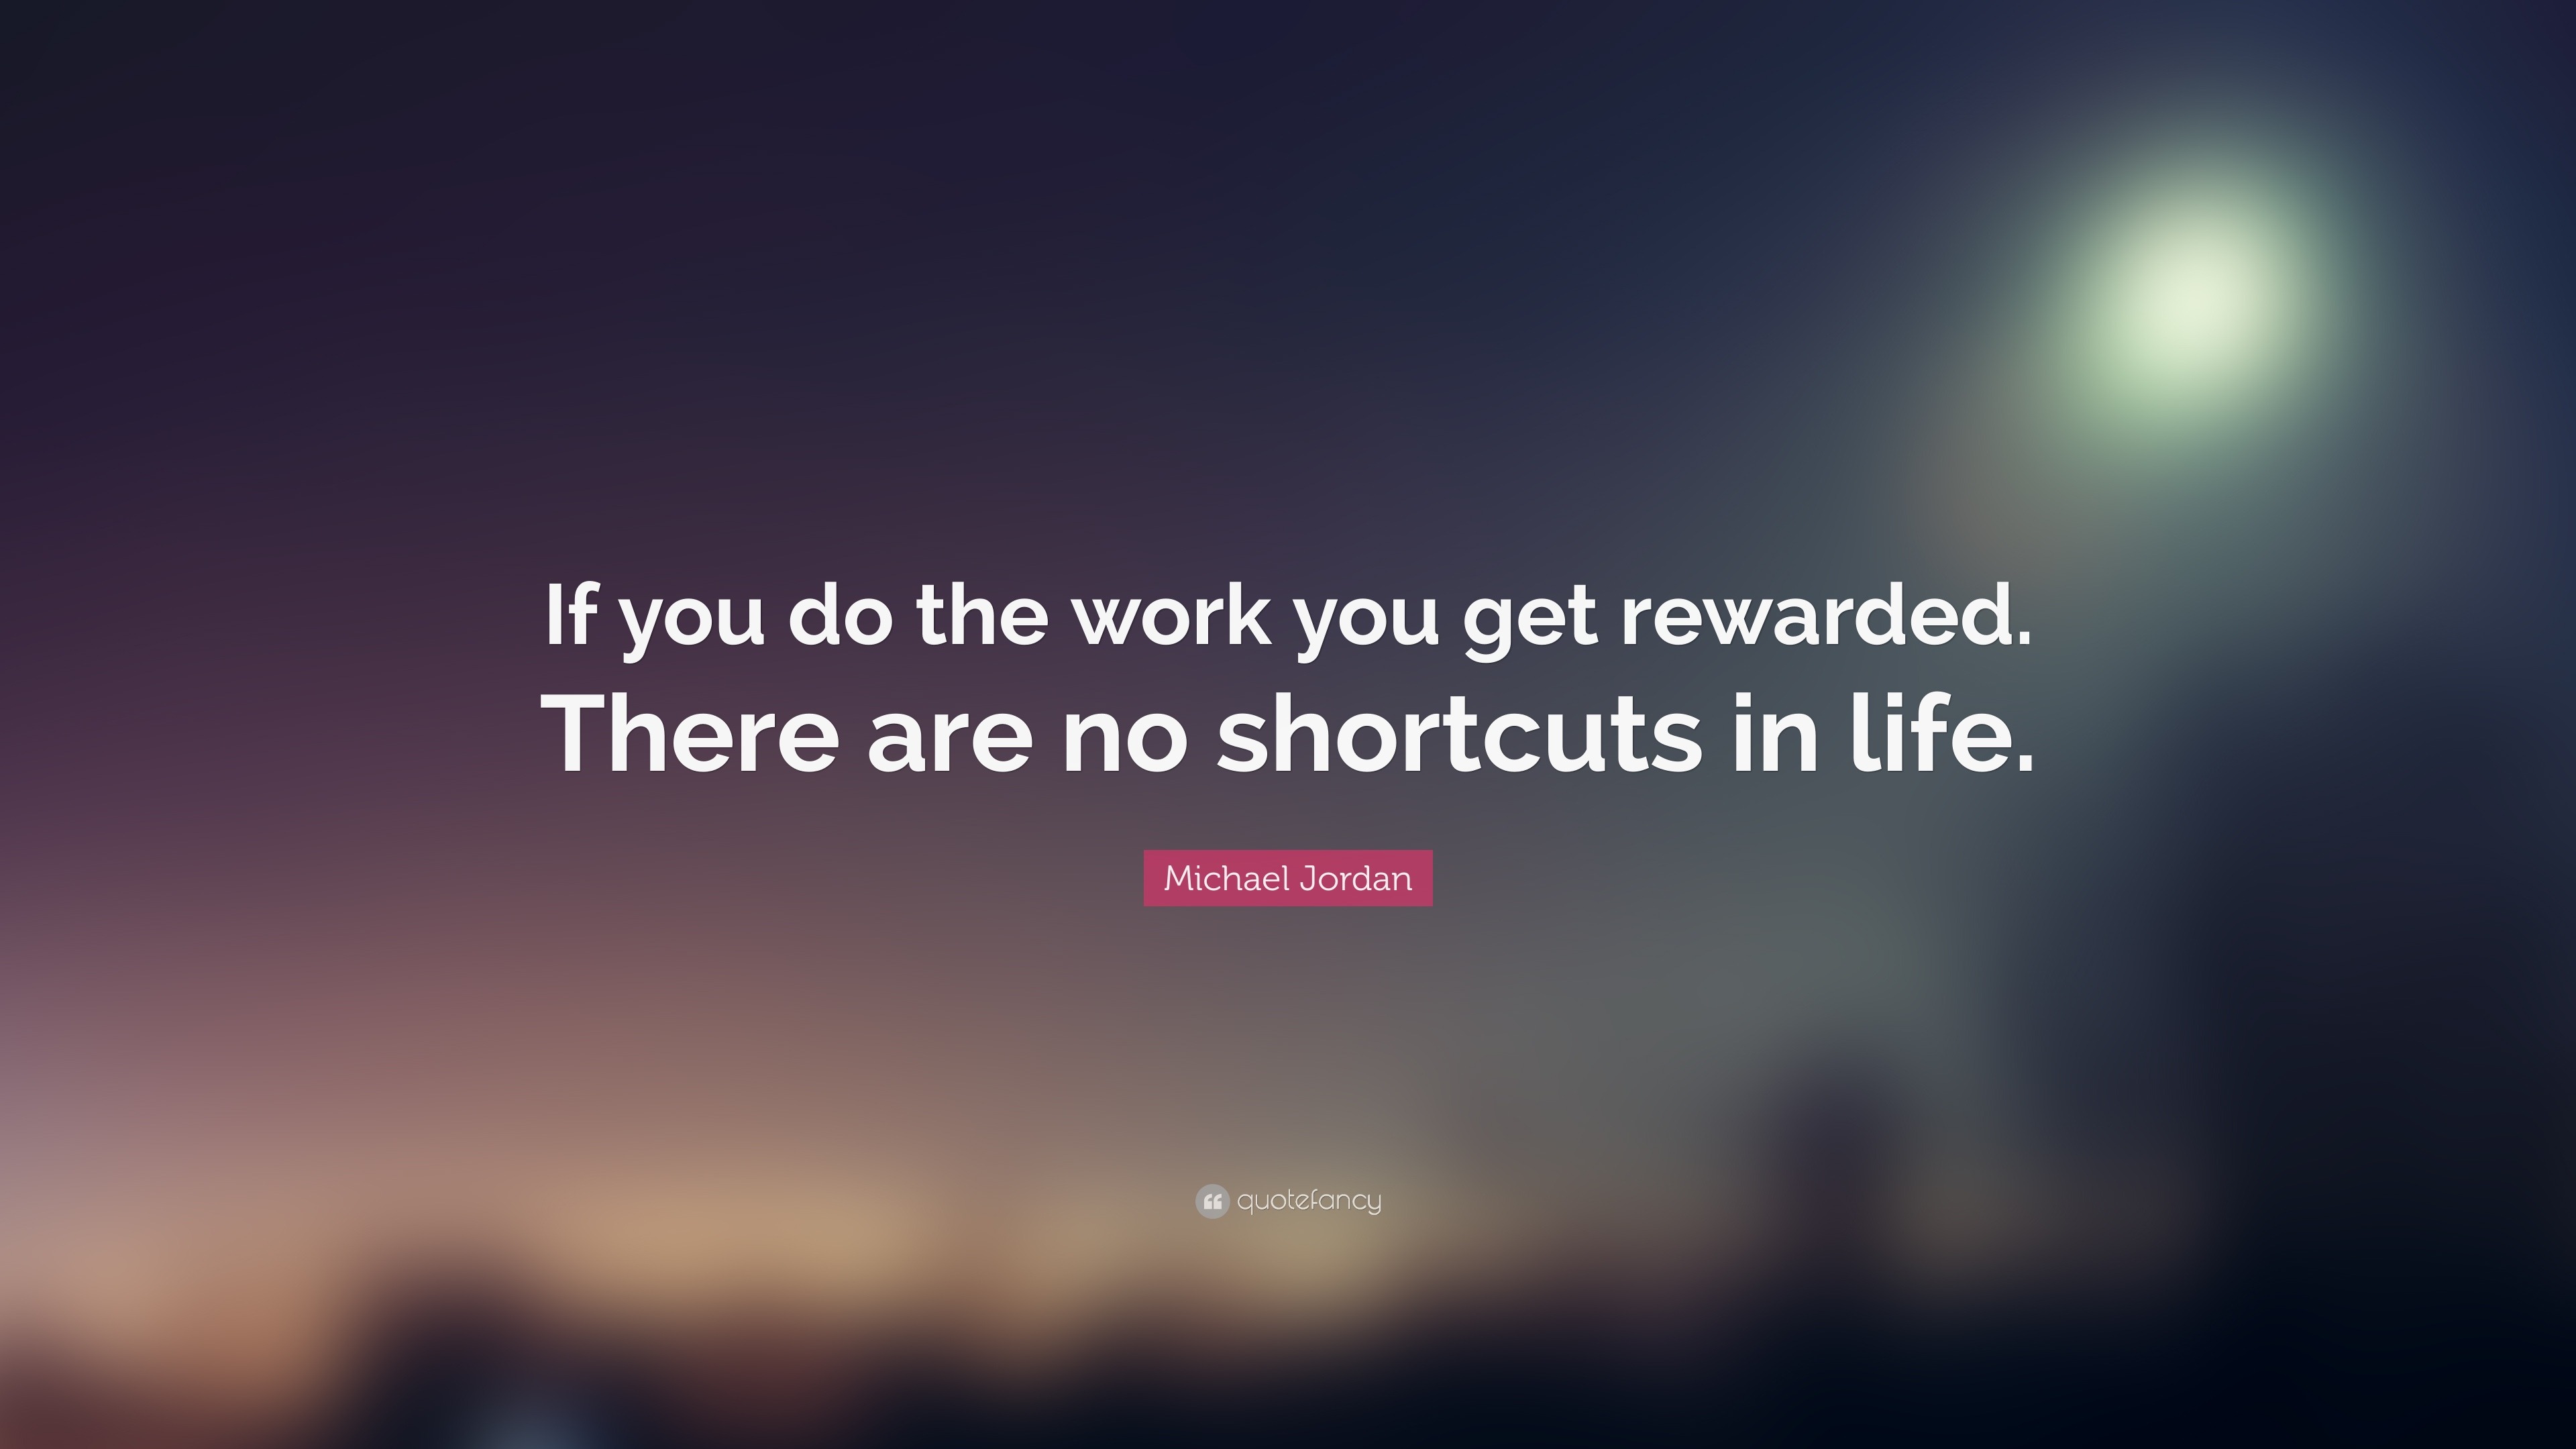 Michael Jordan Quote: “If you do the work you get rewarded. There are ...